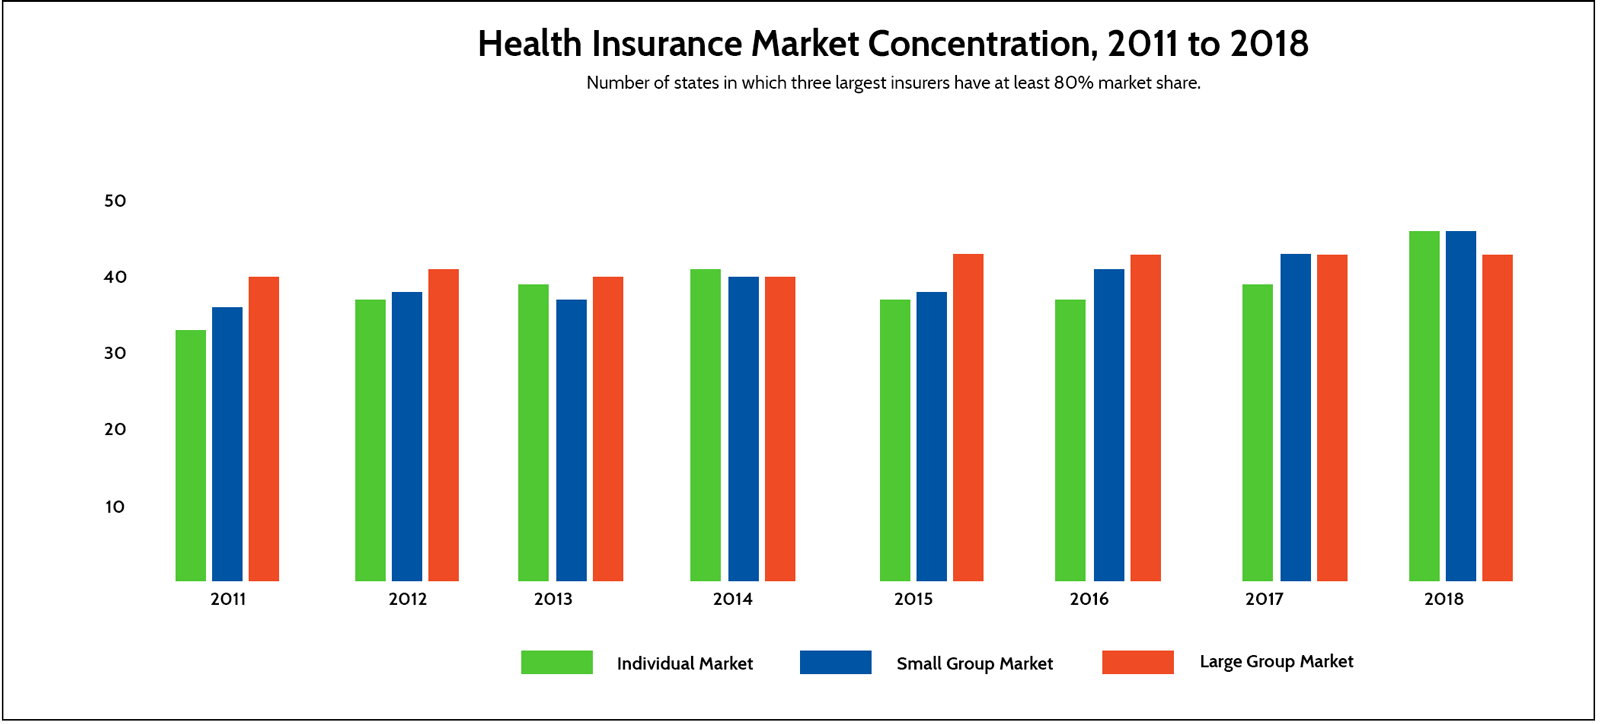 Health Insurance Market Concentration